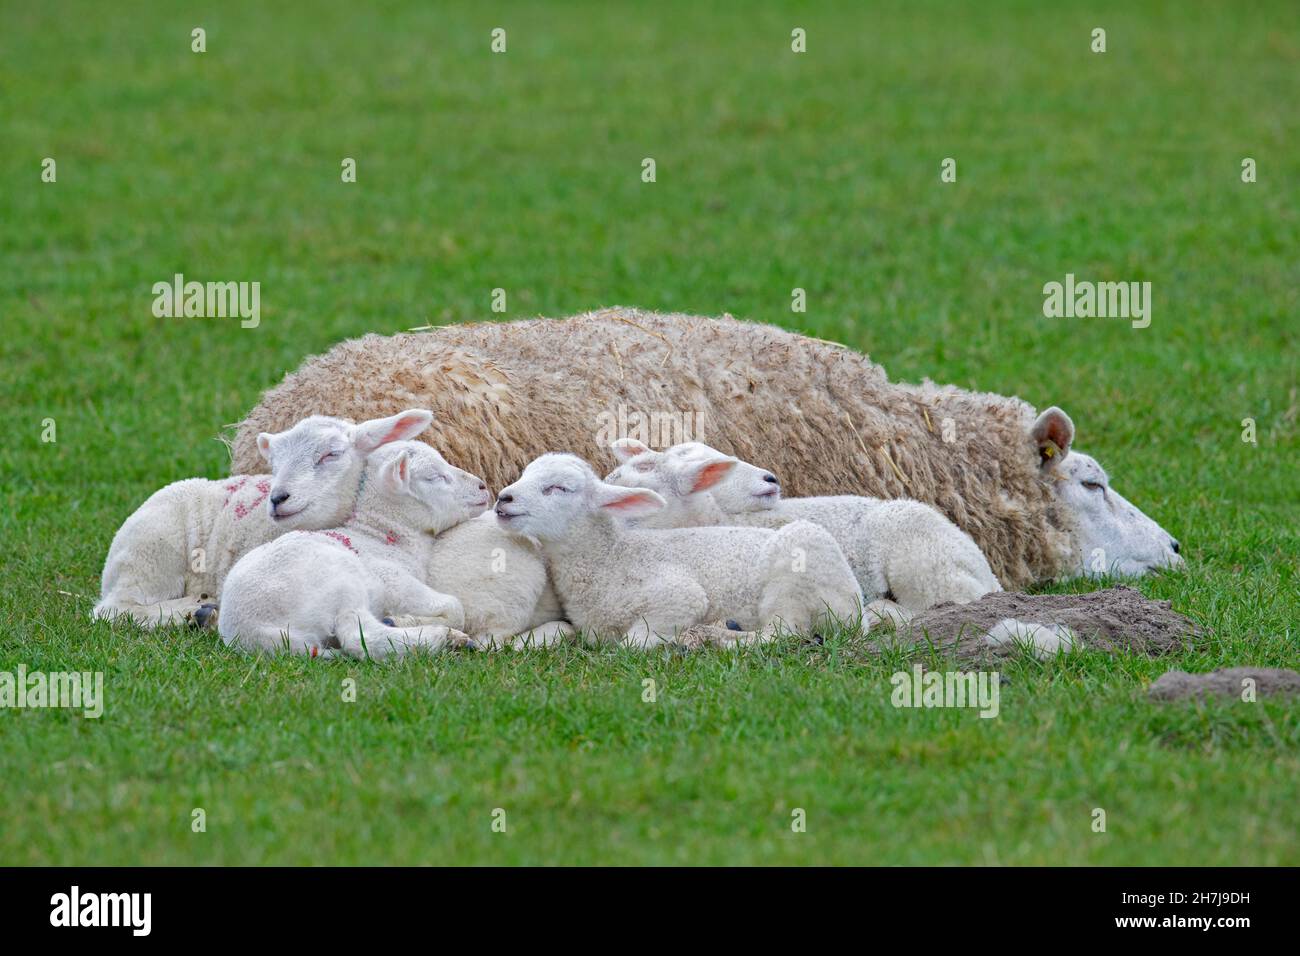 Domestic sheep ewe with five white lambs sleeping huddled together in field / pasture Stock Photo